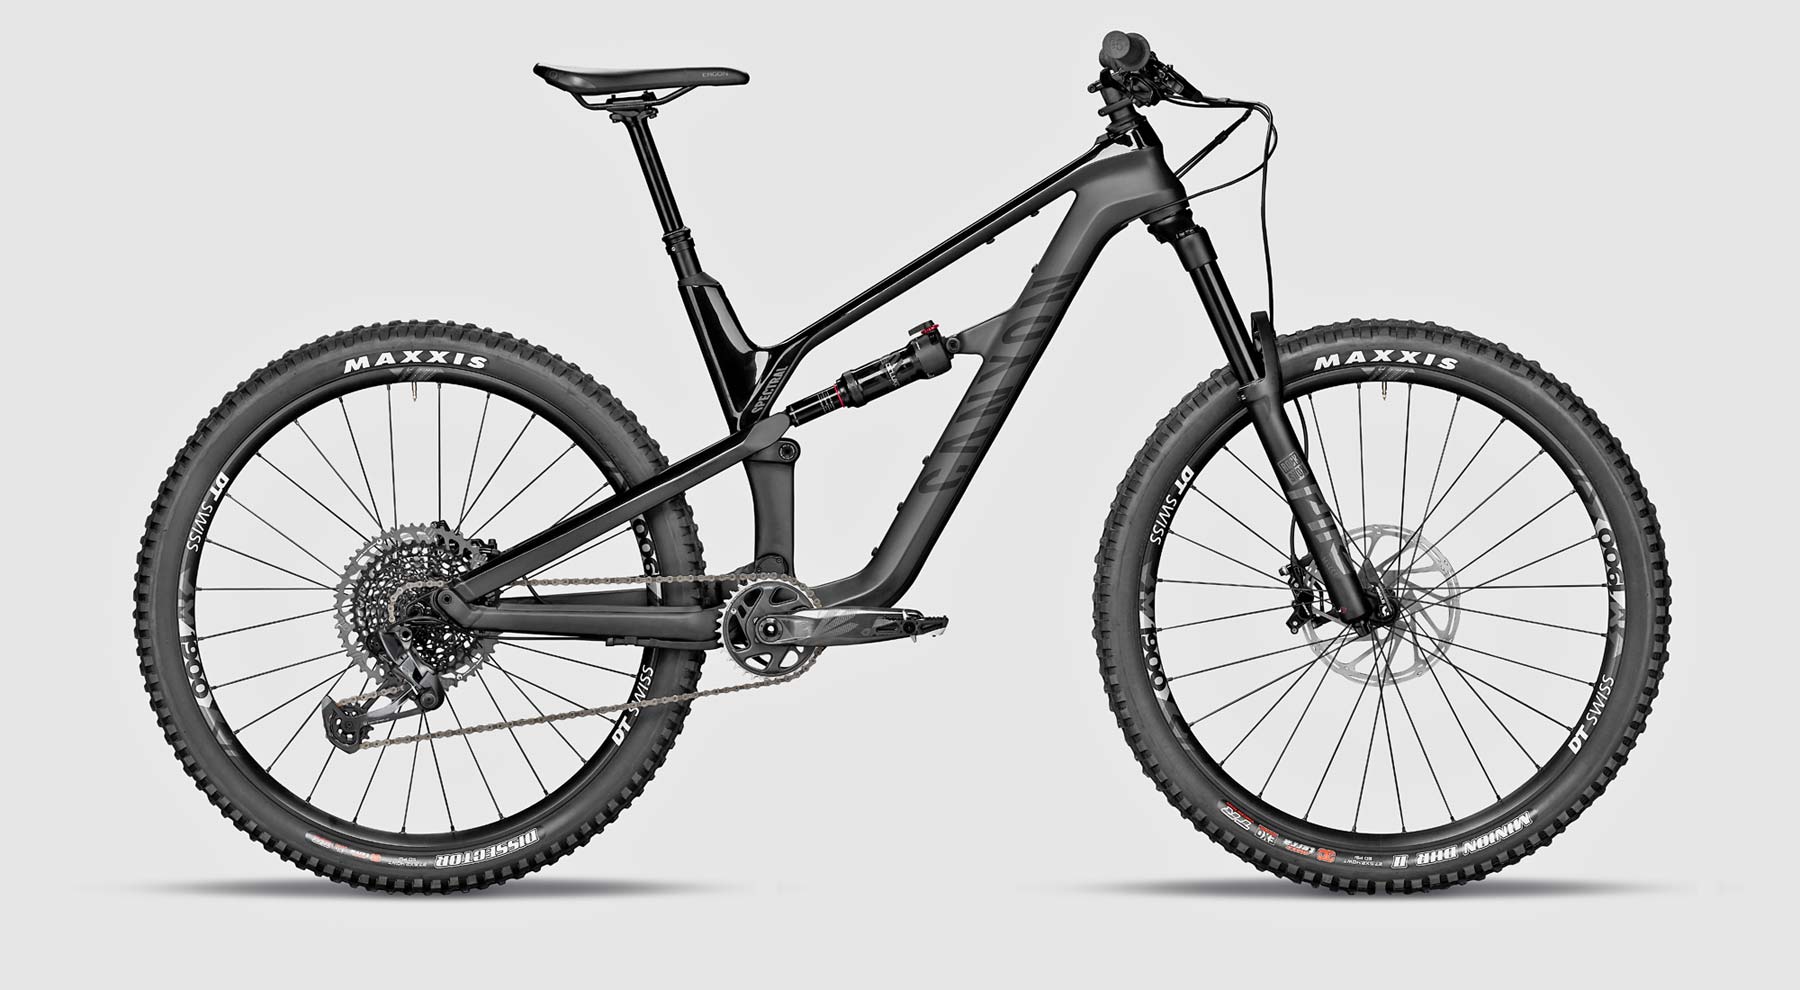 2021 Canyon Spectral trail bike, 27.5" 150mm all-mountain bike in carbon or alloy, CF 7